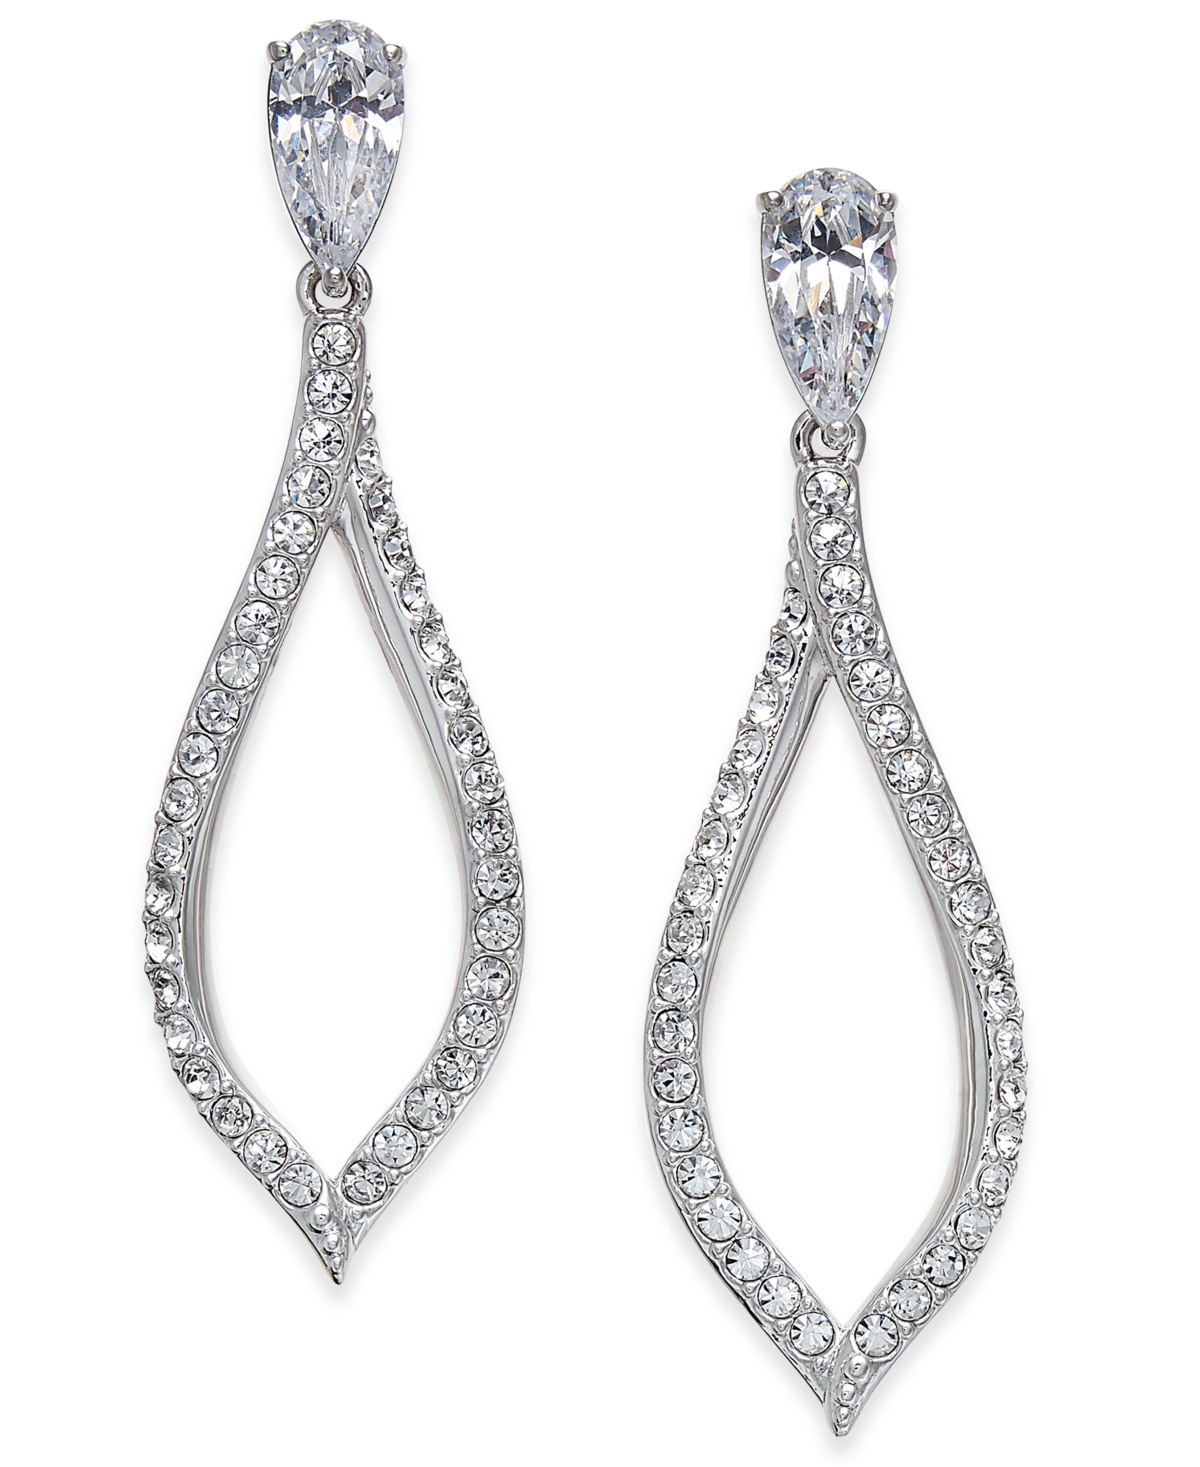 Silver-Tone Pave Drop Earrings, Created for Macy's - Silver